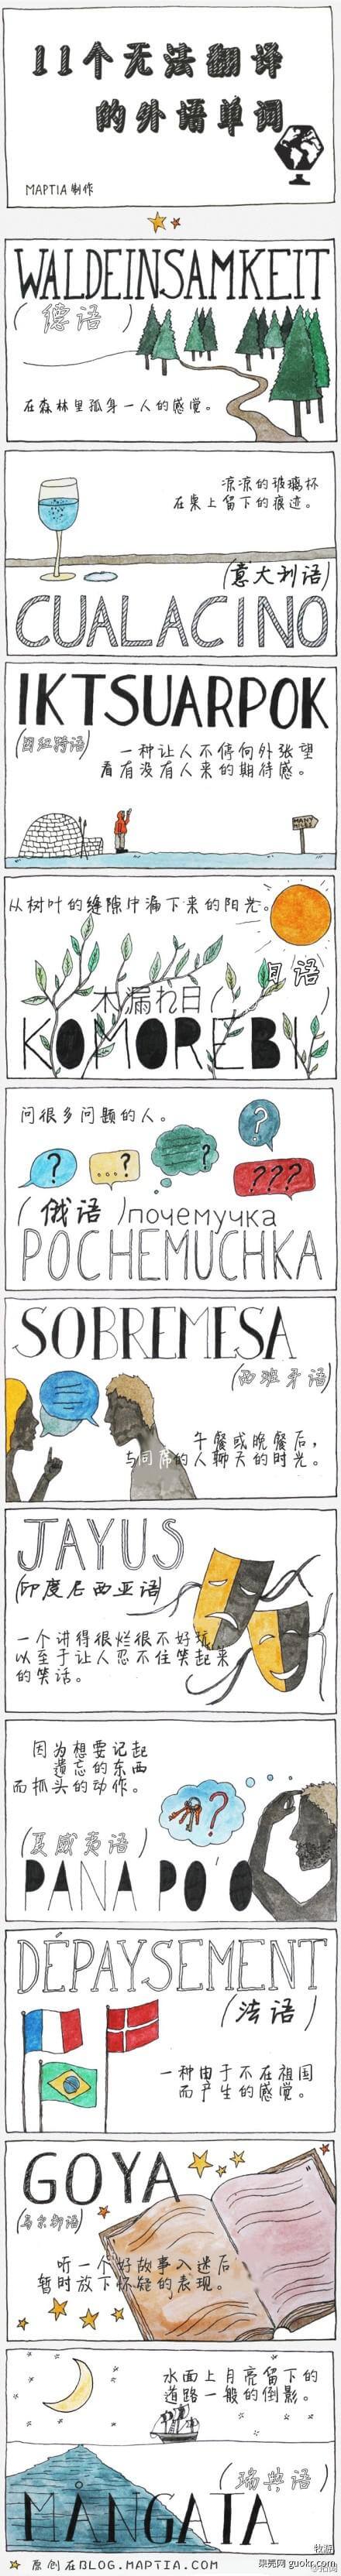 What are the stories/allusions behind these untranslatable words?